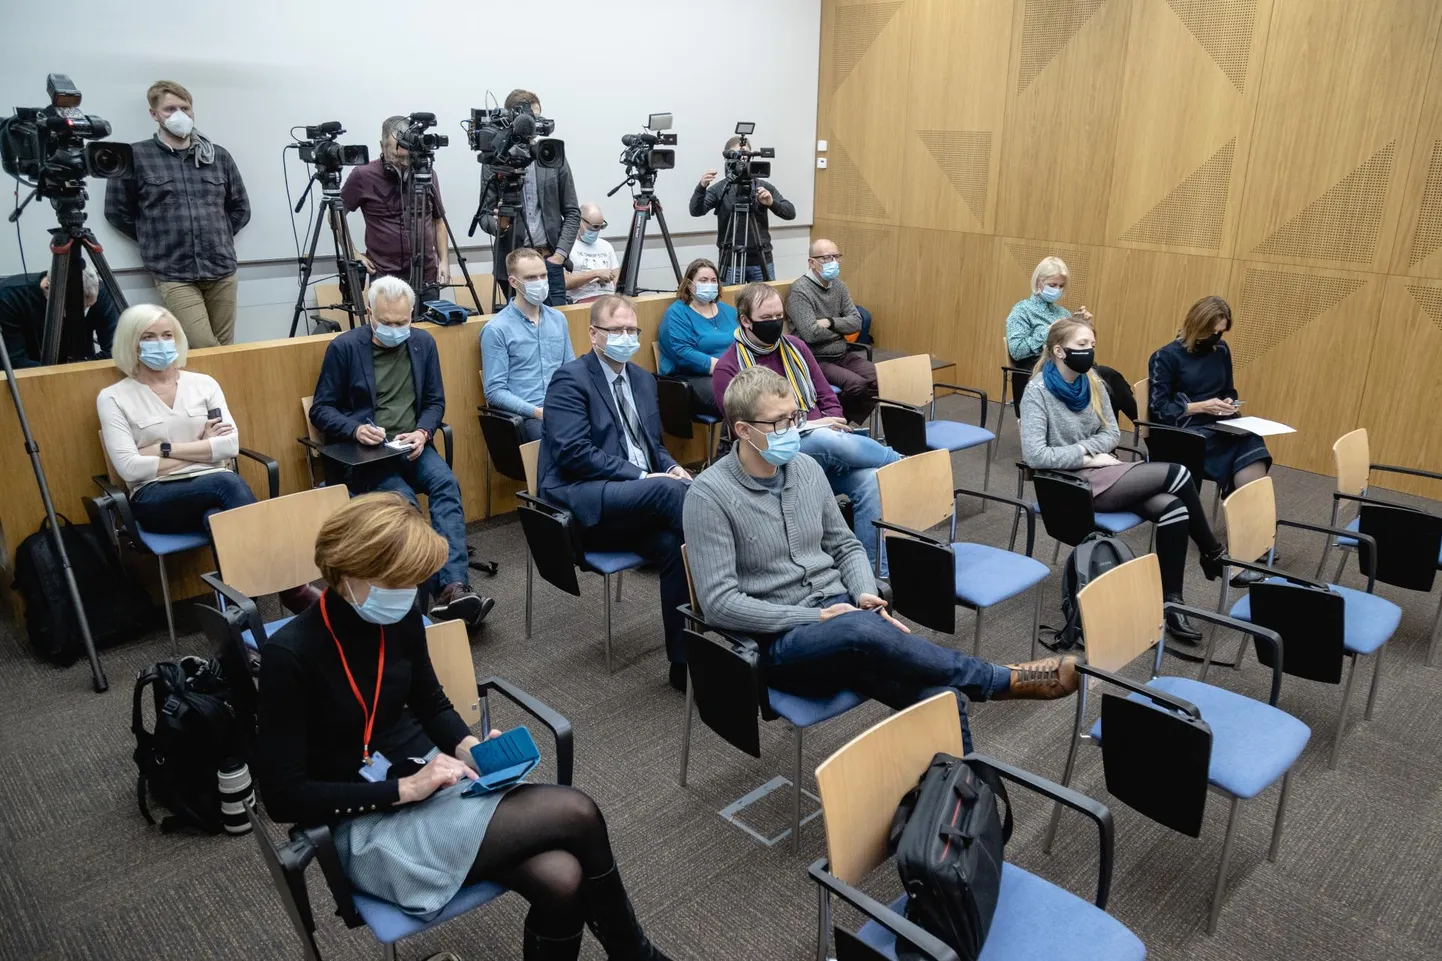 Journalists wearing masks at the COVID-19 press conference on Friday.